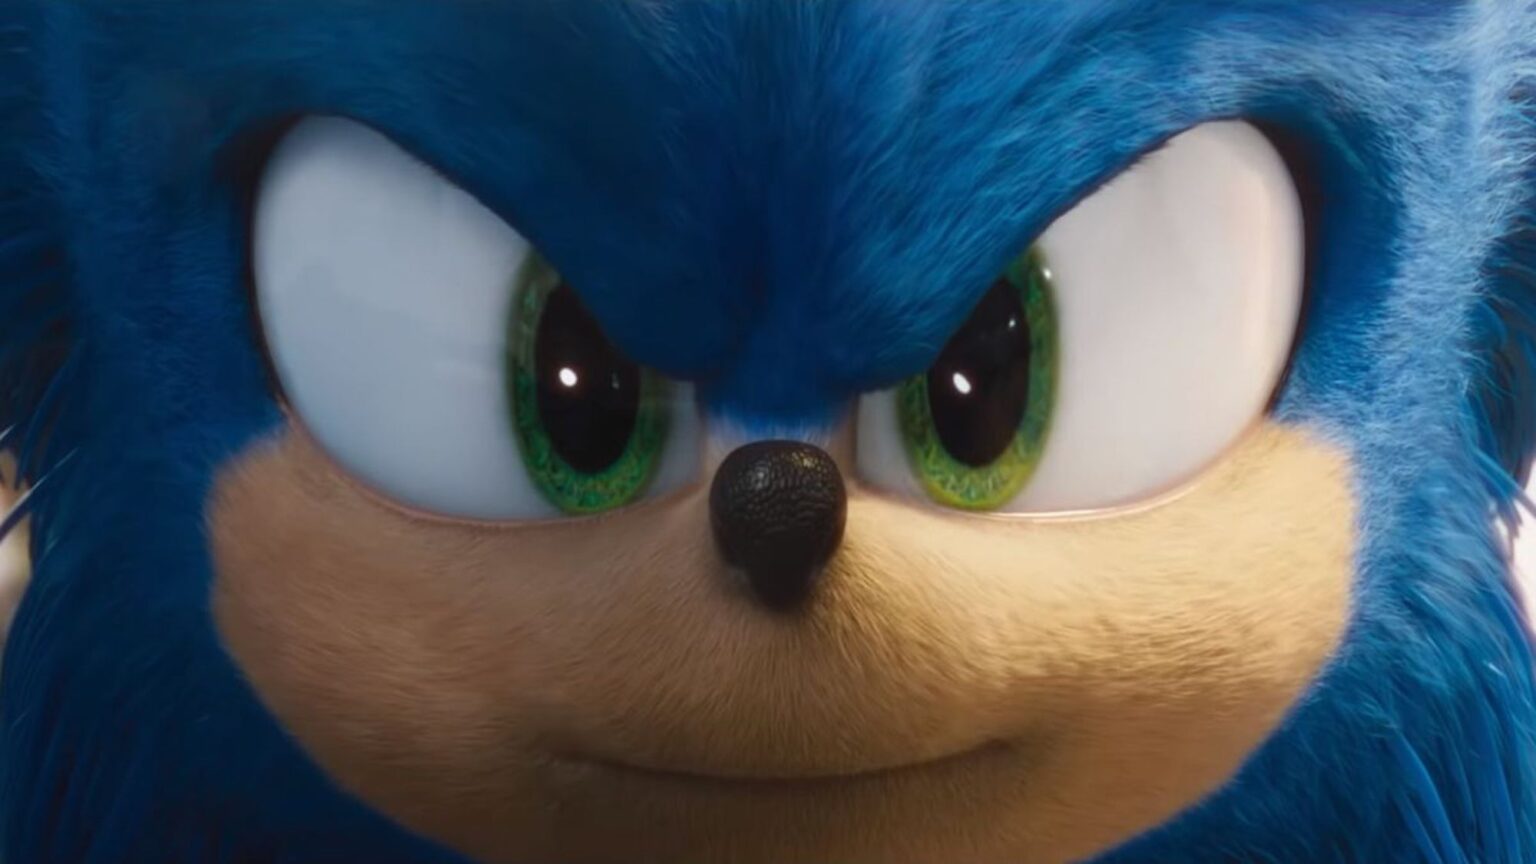 Gotta go fast! There's a new 'Sonic the Hedgehog' movie on the way. Rip open the story and find out who will join our hero in 'Sonic the Hedgehog 2'.